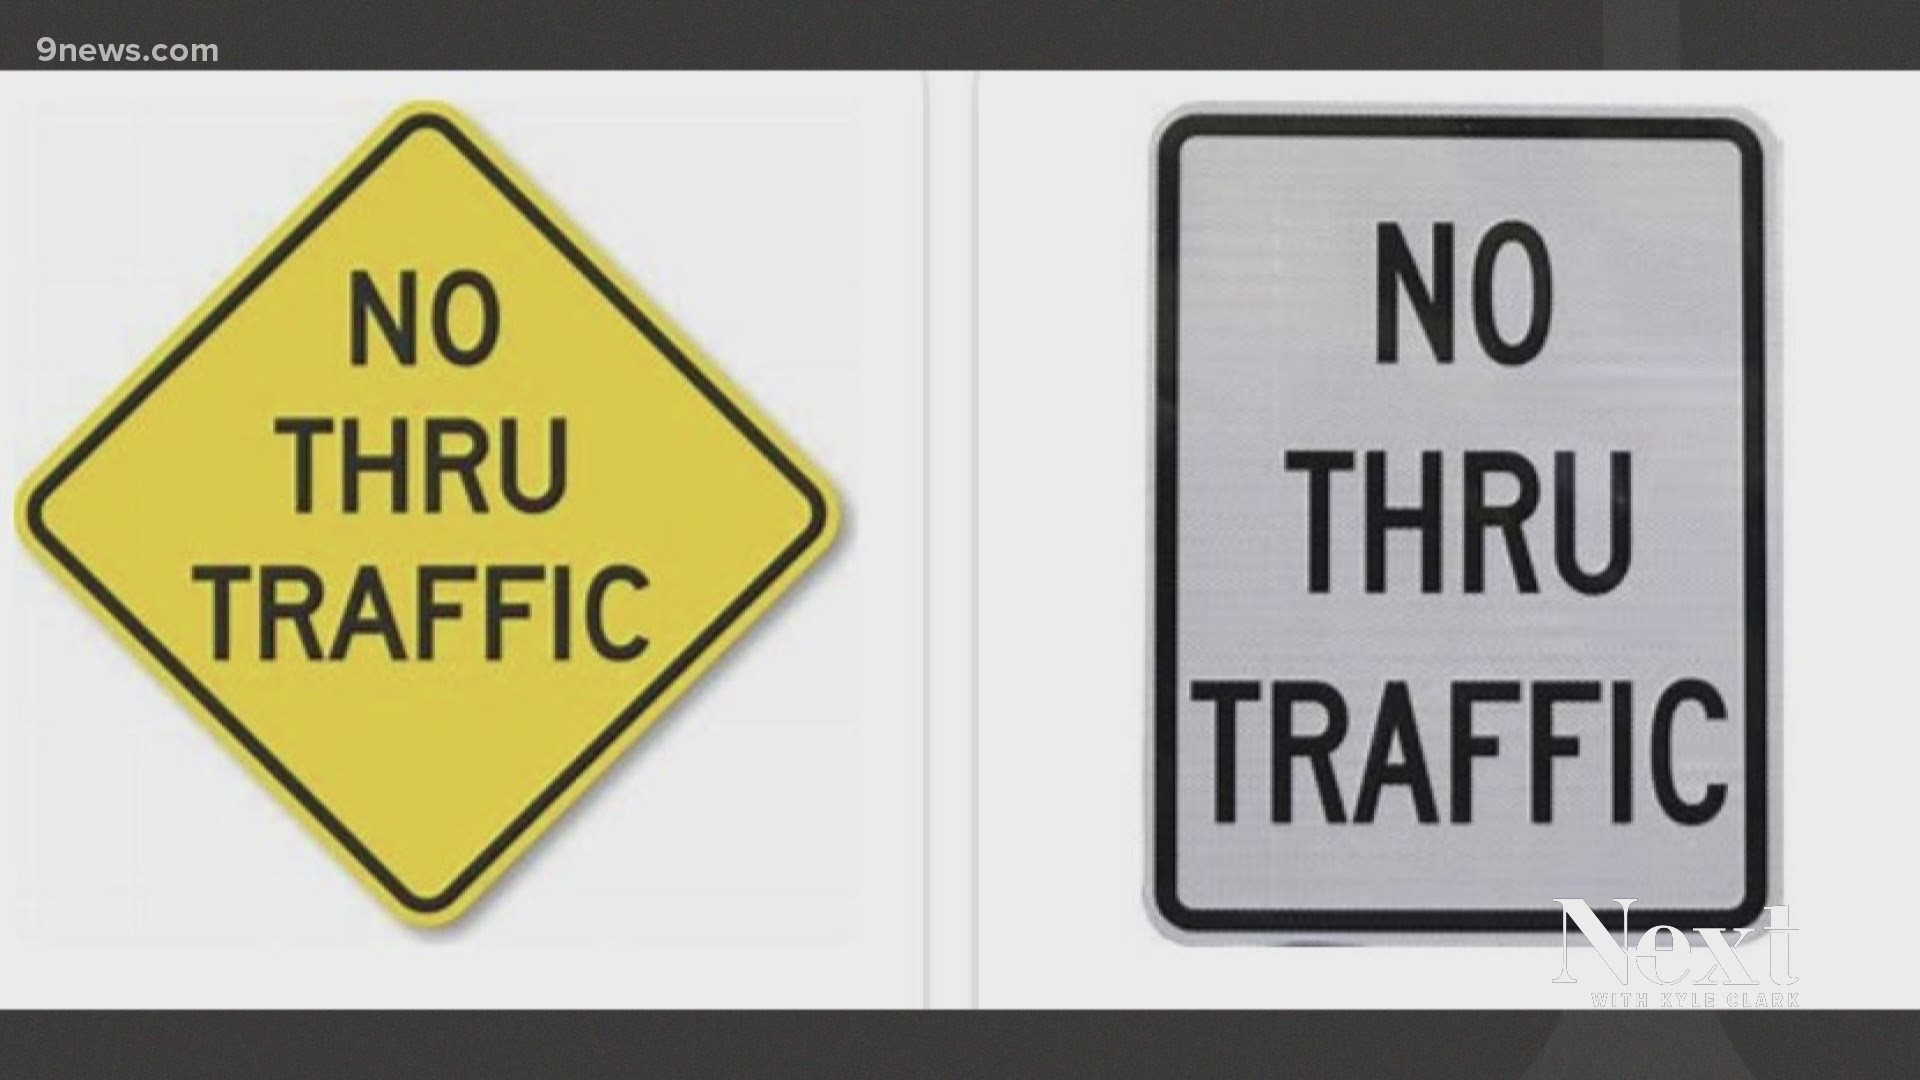 Following our story about street signs earlier this week, we got a question wondering about these "no thru traffic" signs.